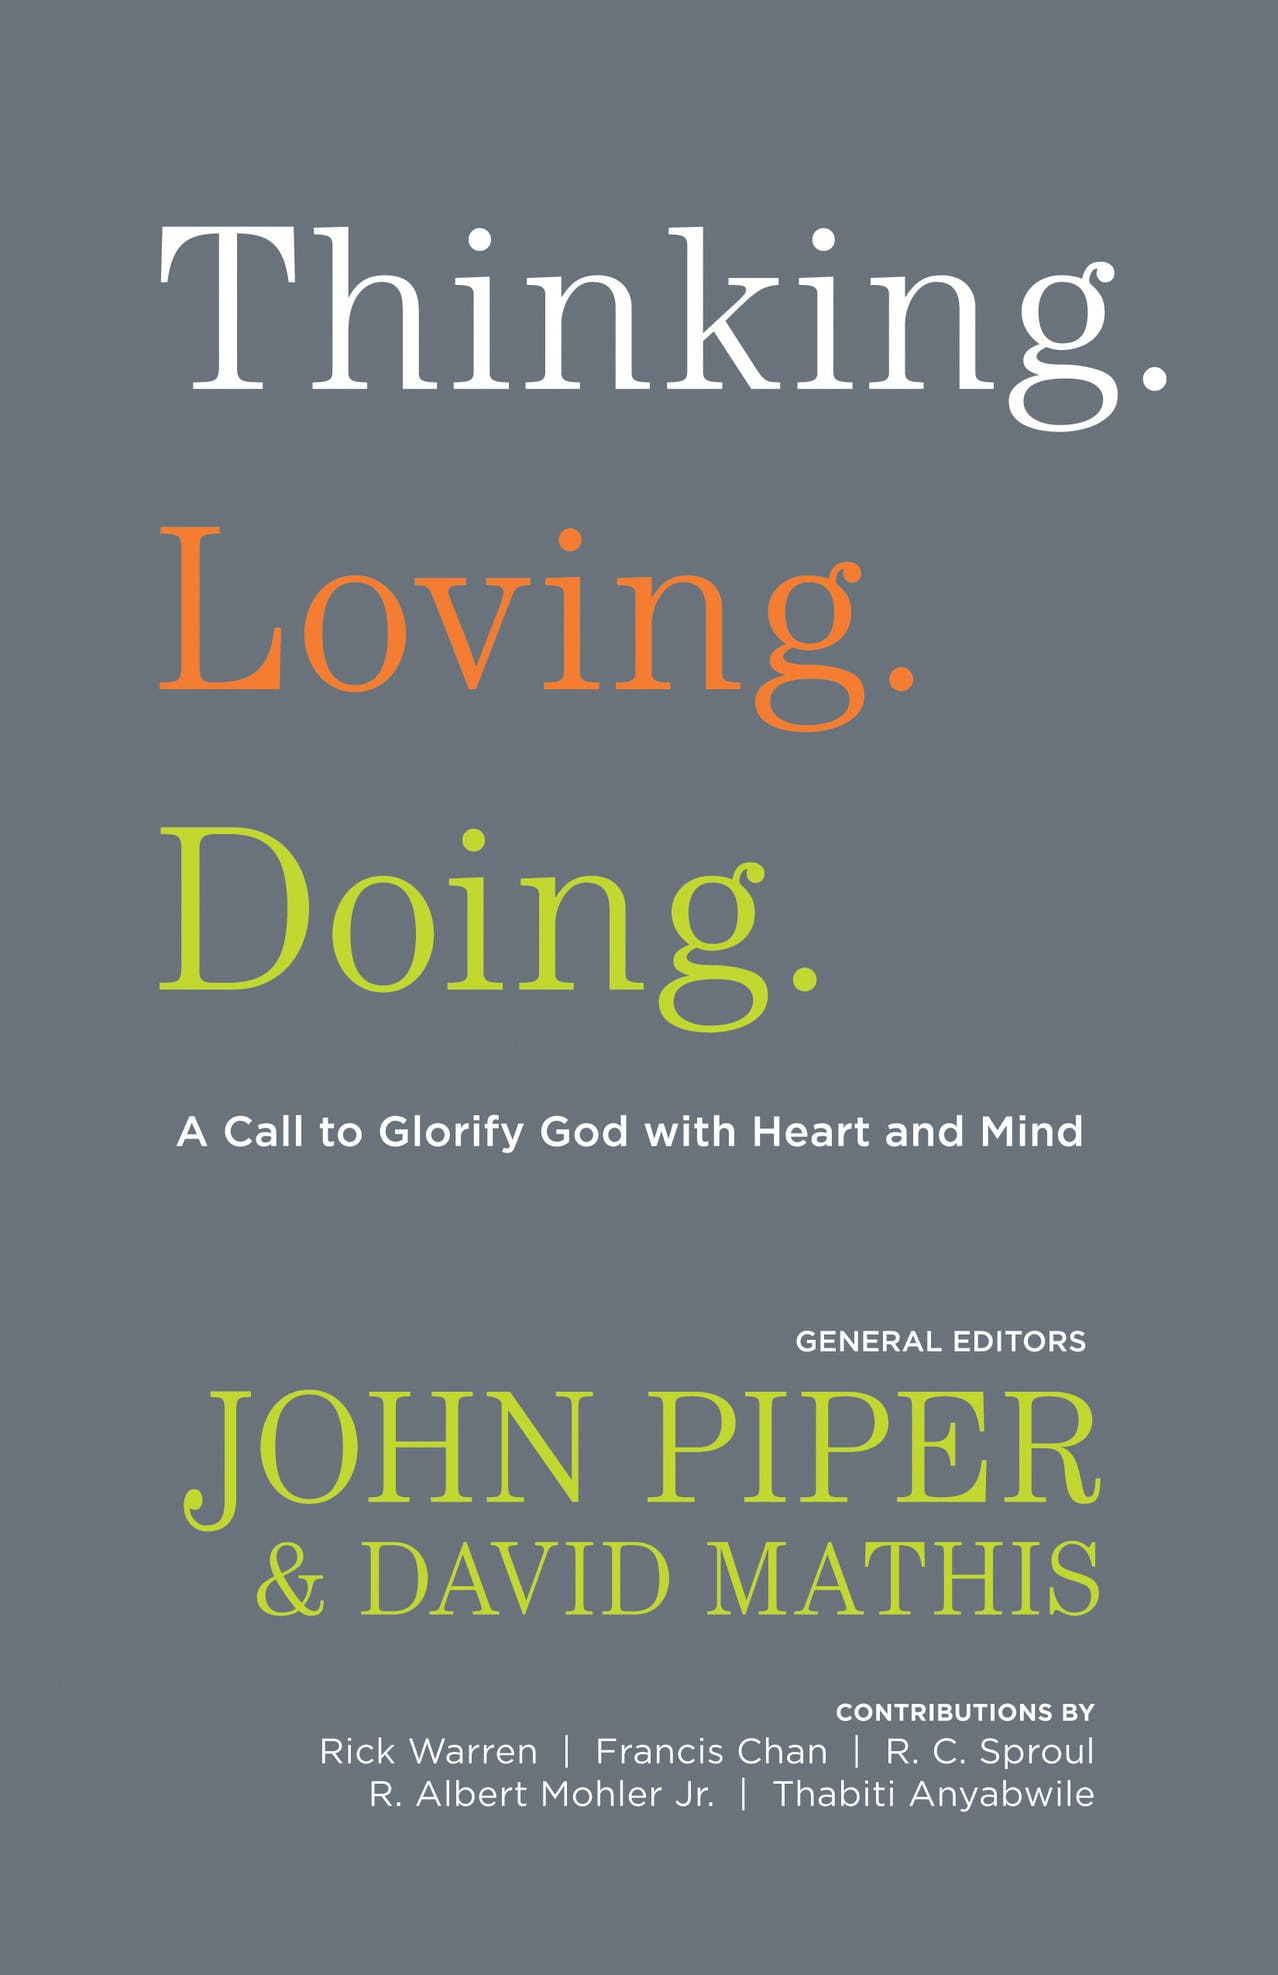 DOWNLOAD PDF: Thinking, Loving, Doing by John Piper 17